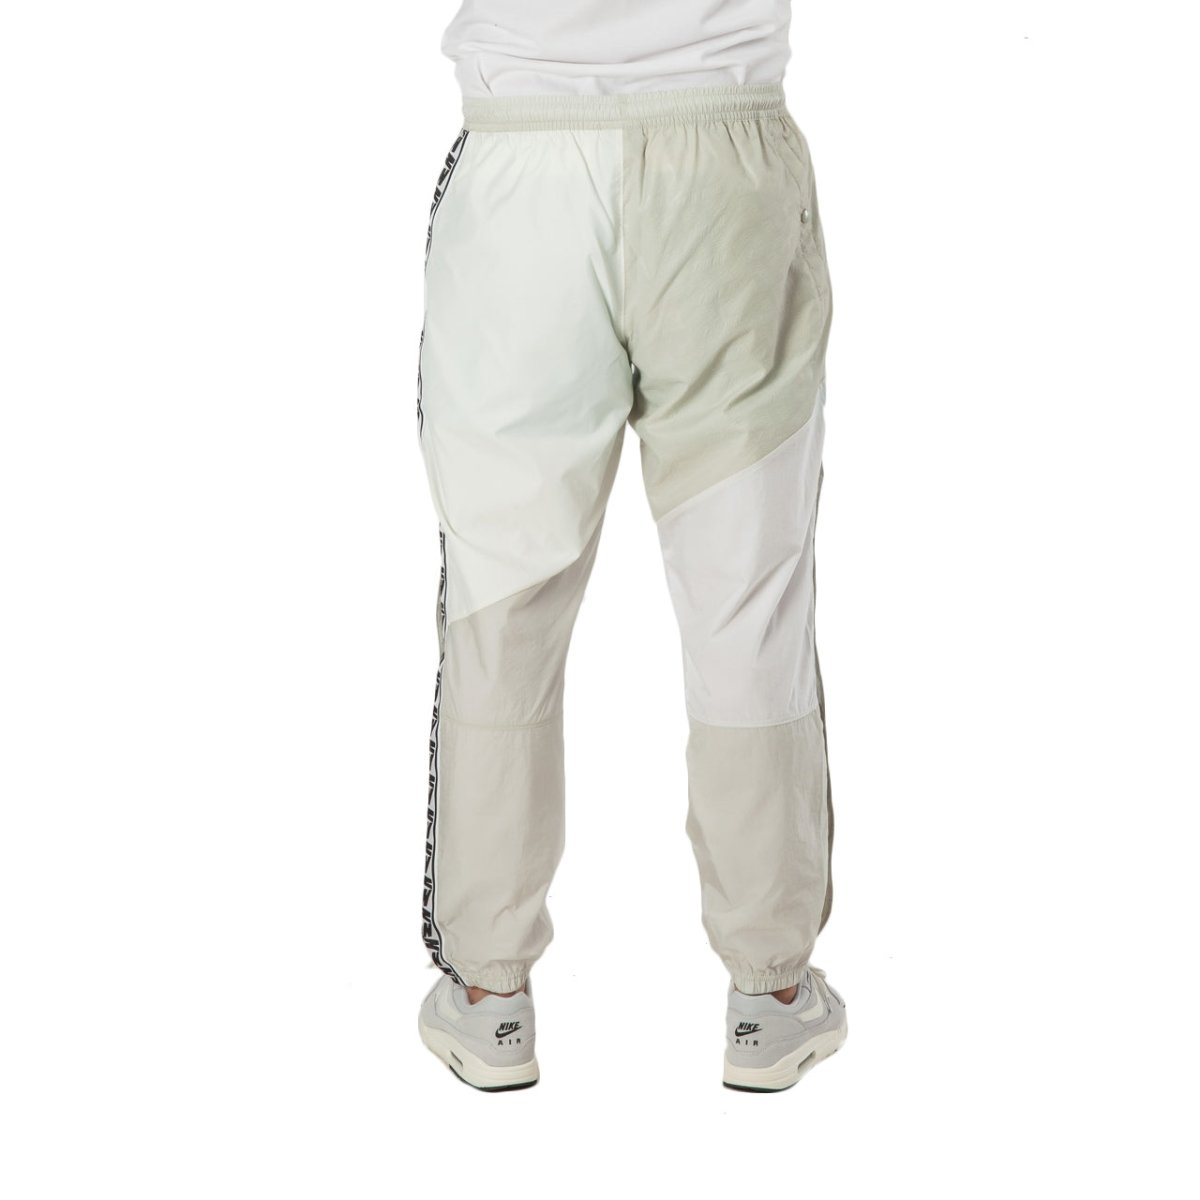 Nike NSW Taped Woven Pant (Weiß)  - Allike Store